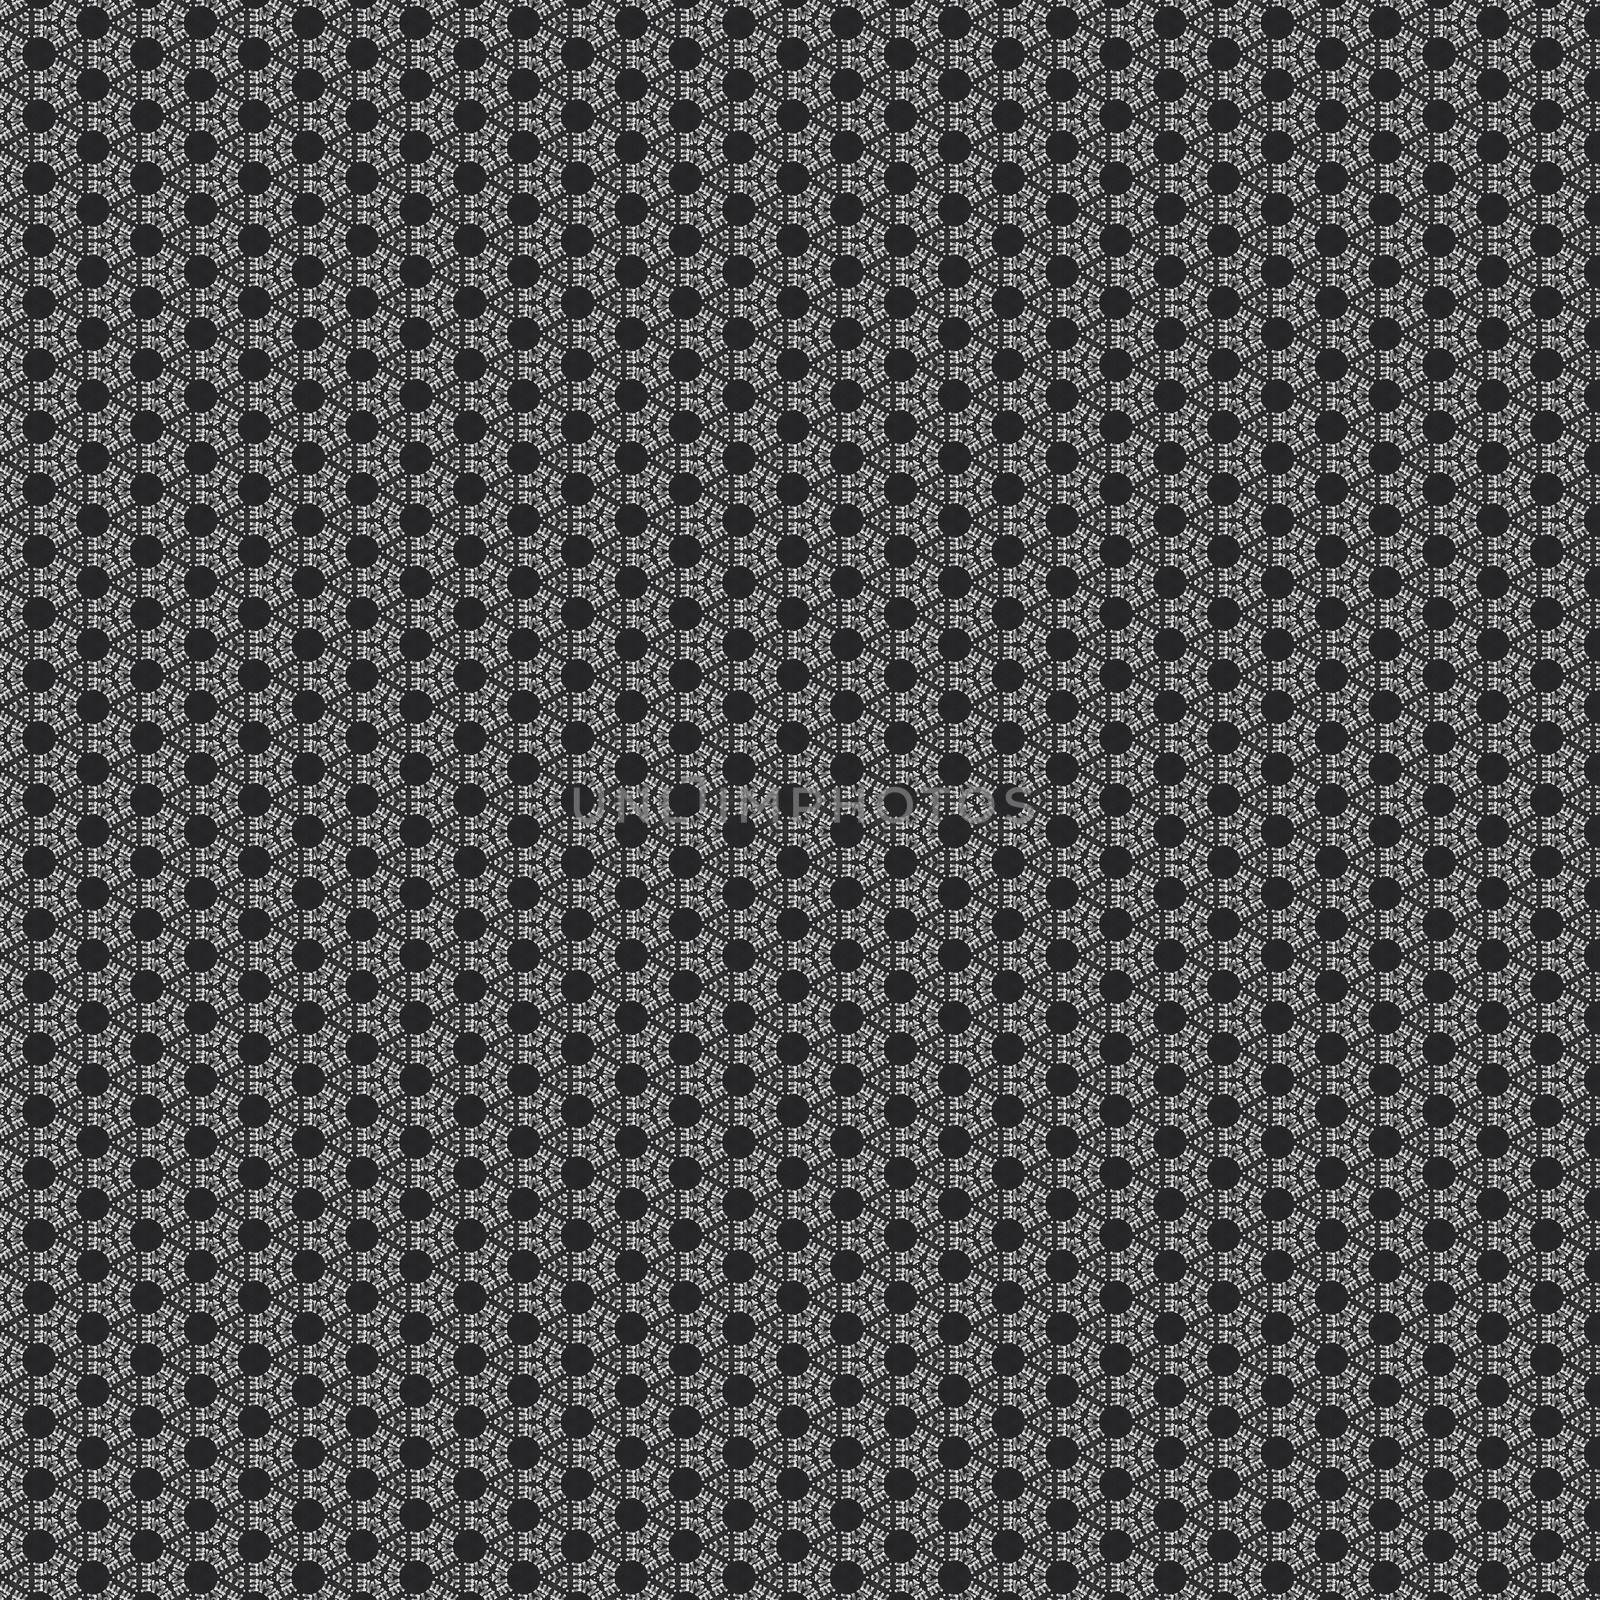 Elegant and ornamental dark grey symmetrical designs on solid sheet of wallpaper. Concept of home decor and interior designing by tabishere